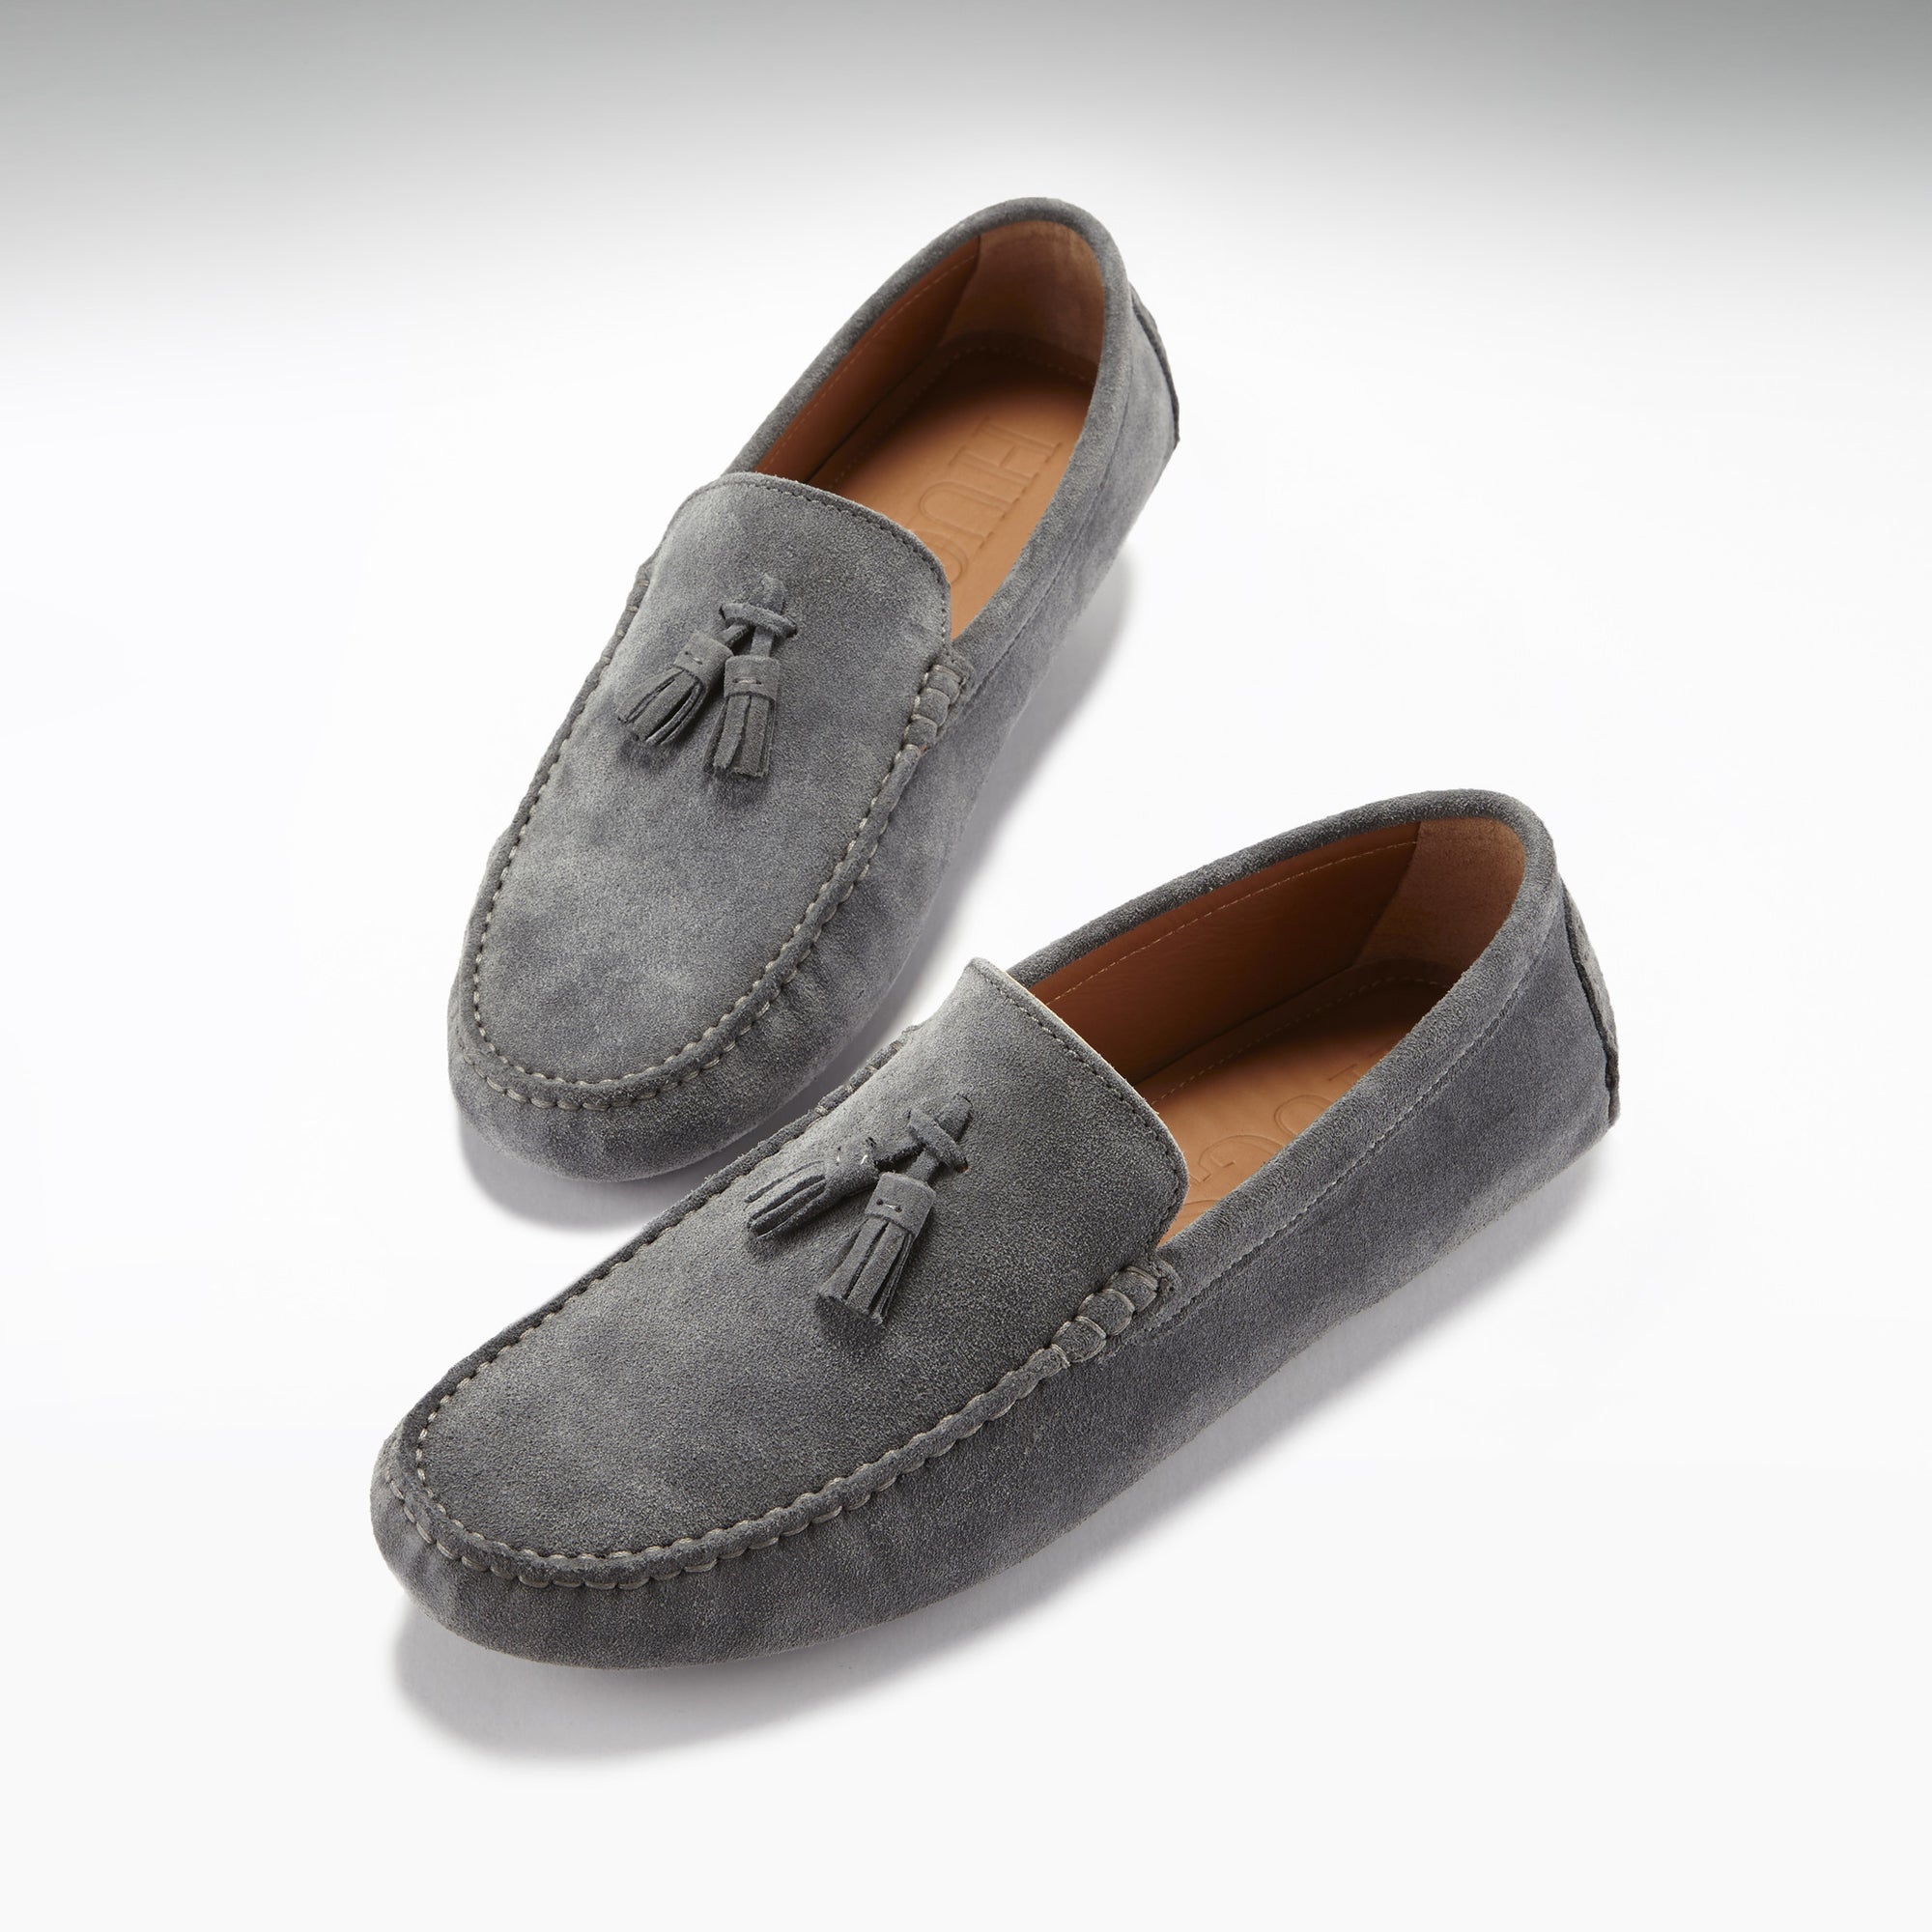 Driving Loafers in slate grey suede with tassell - Hugs & Co.